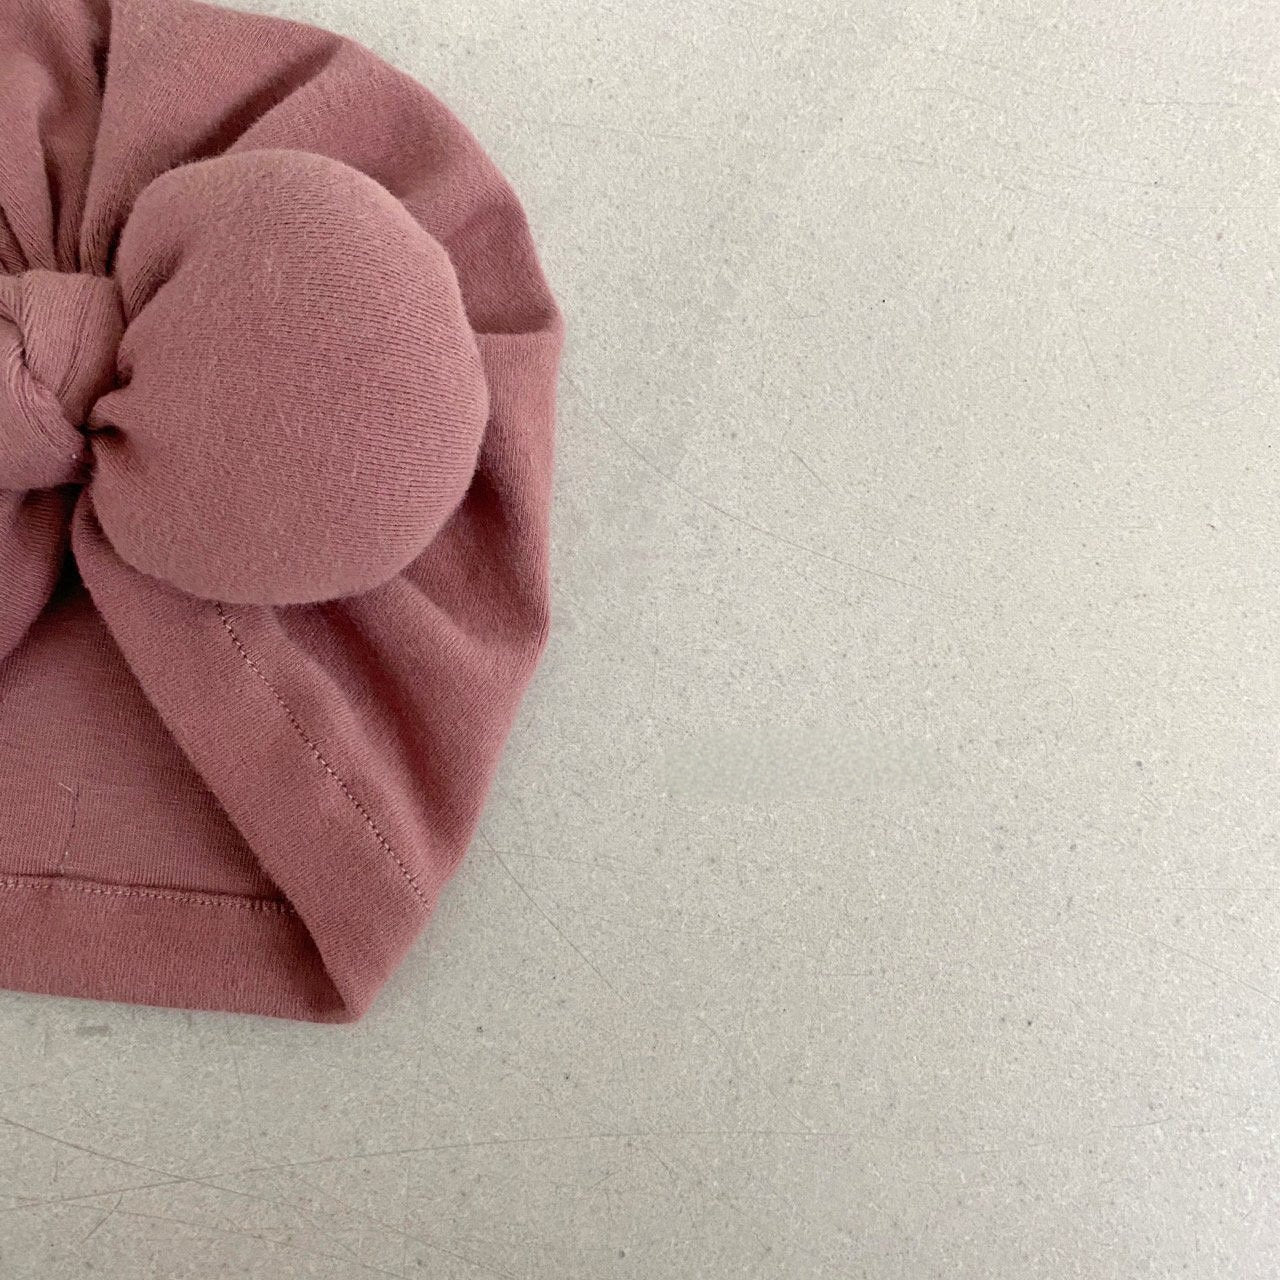 Adorable Baby Turban Hats in Cream, Pink, and Mokka 